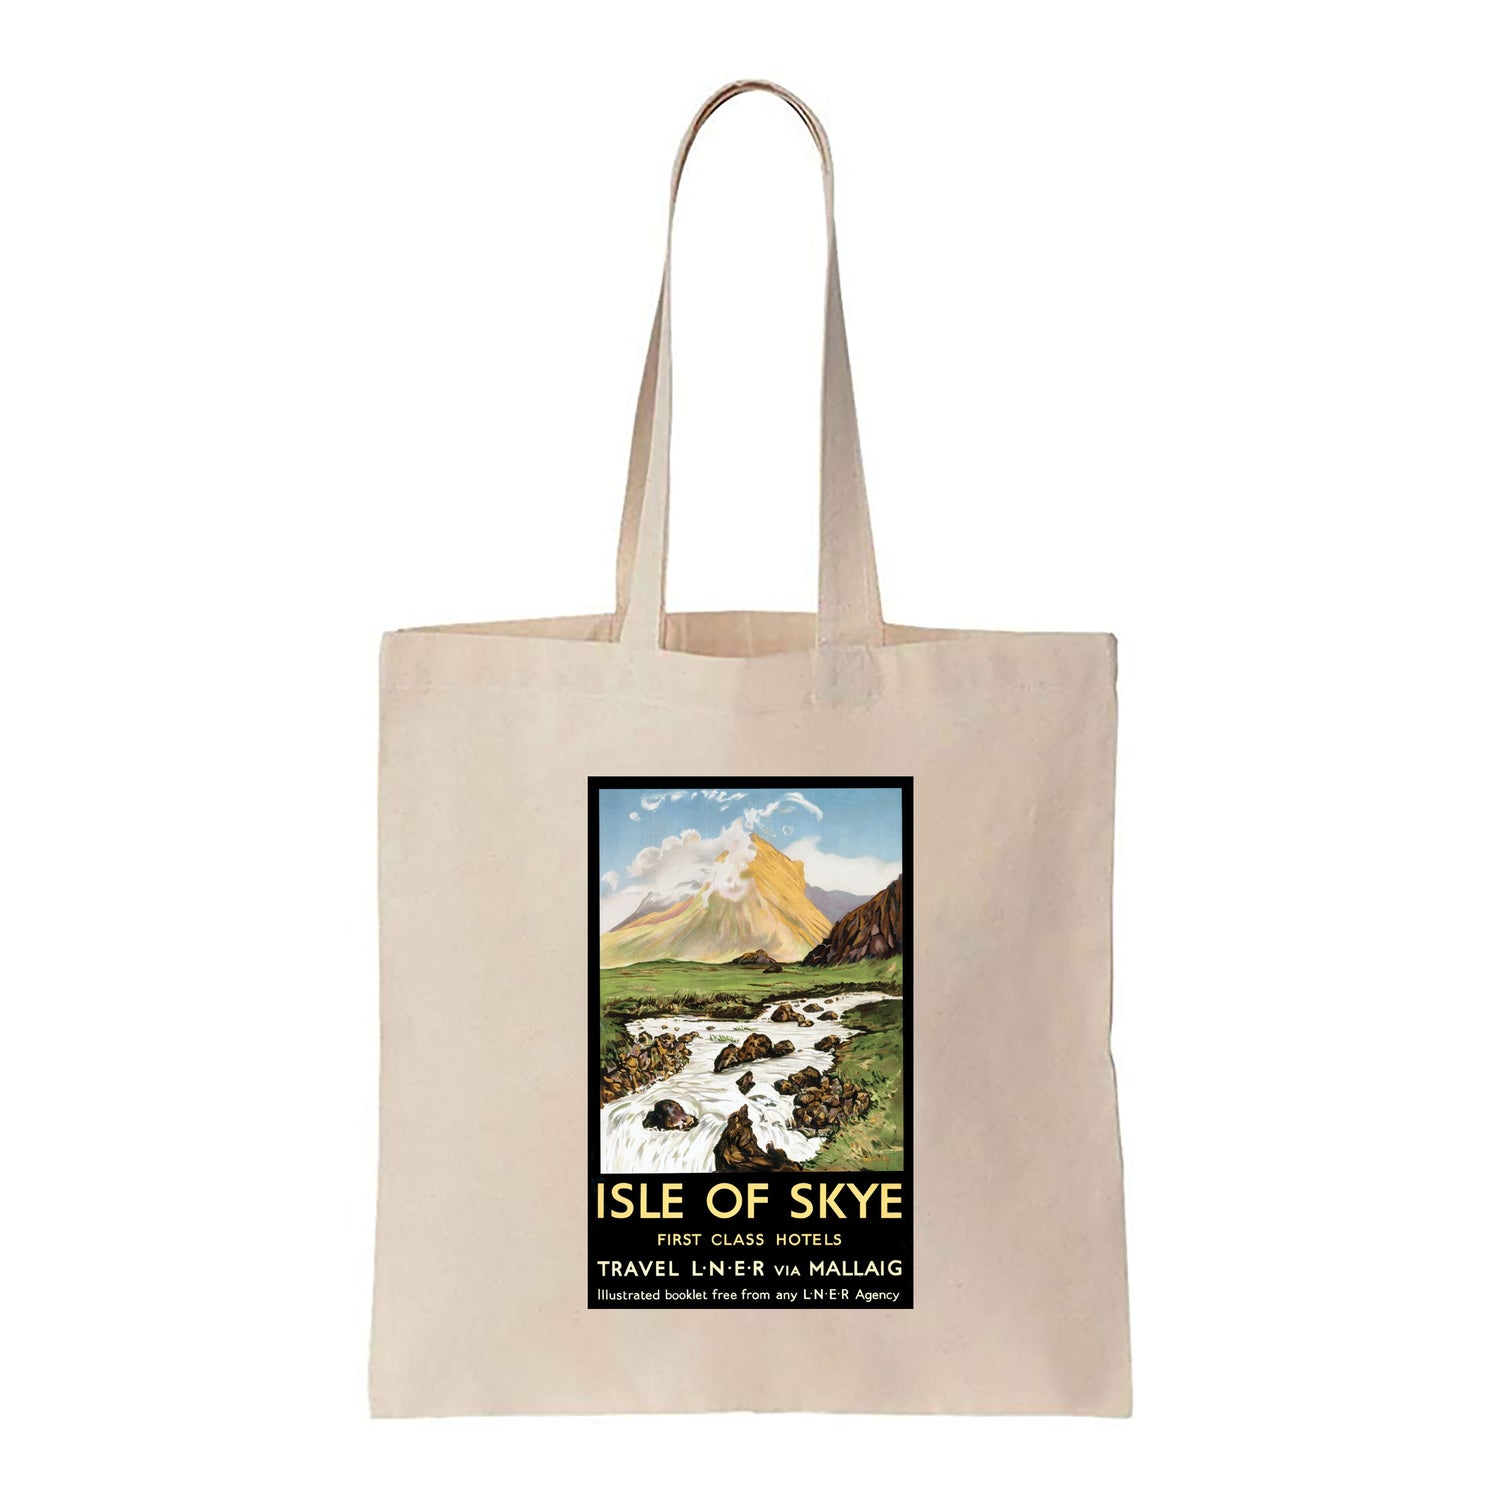 Isle of Skye, First Class Hotels - Canvas Tote Bag